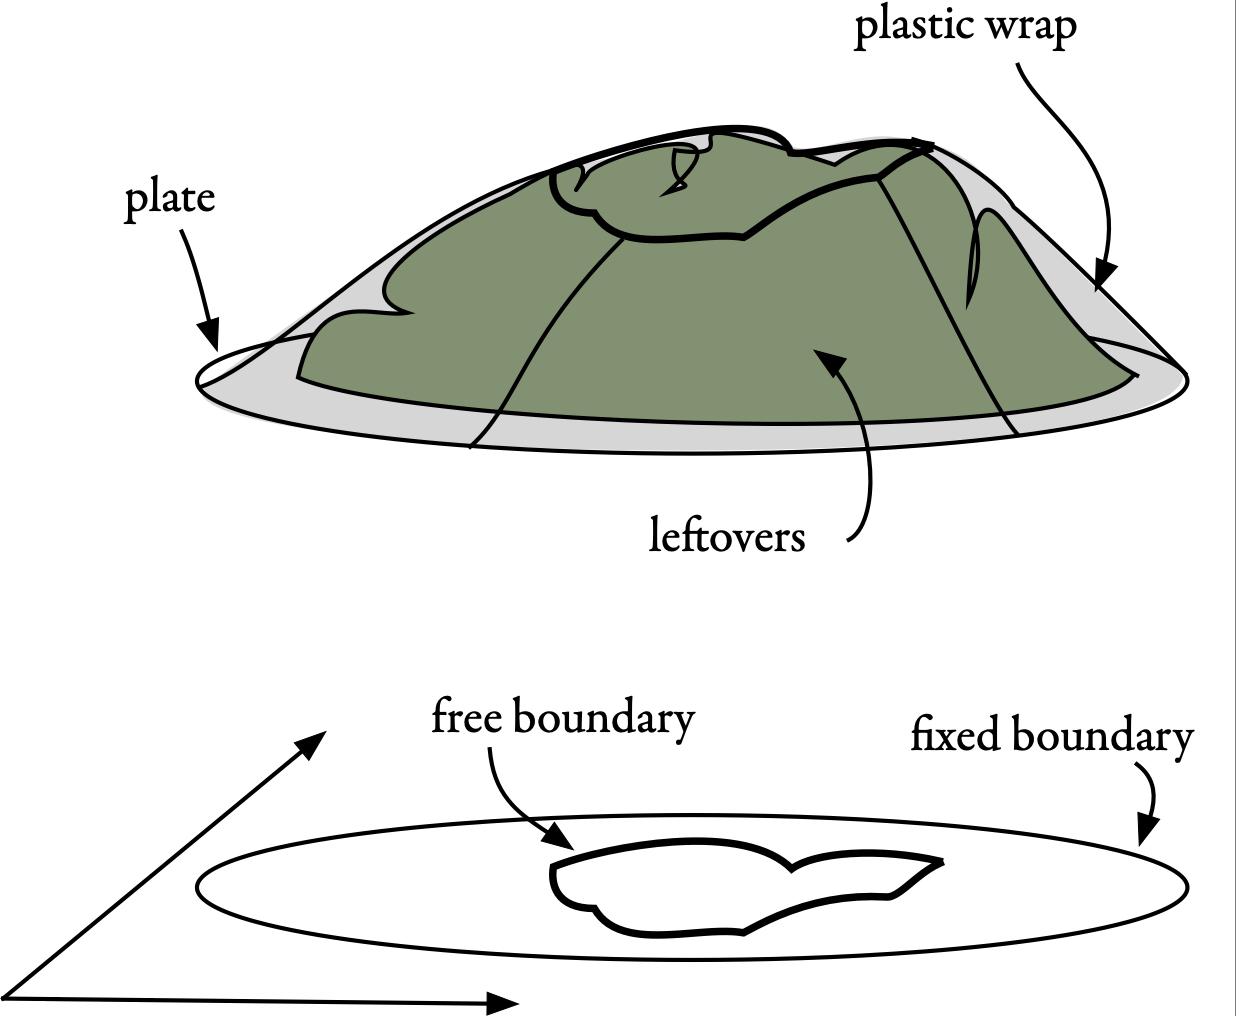 fixed boundary and free boundary for plate of leftovers